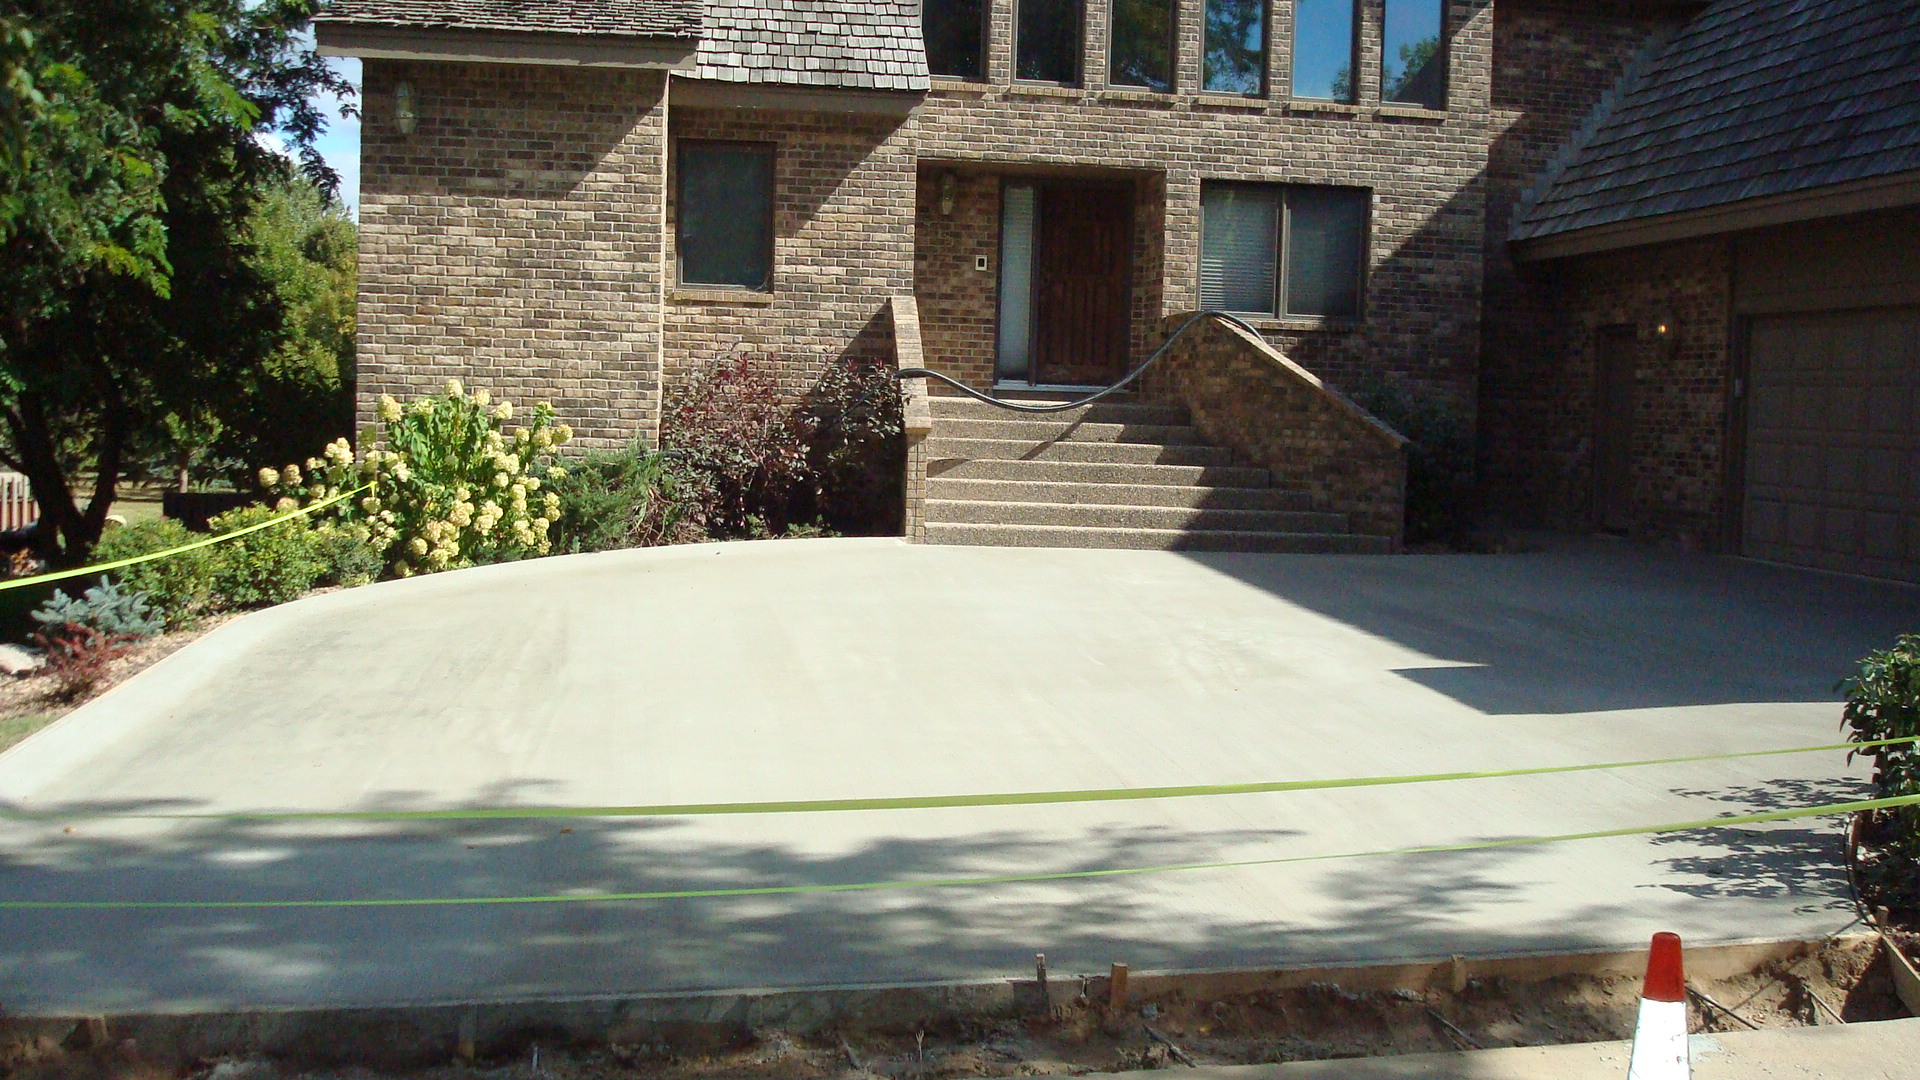 Residential and Commercial flatwork pouring and blockwork masonry services from Voehl Construction Inc.